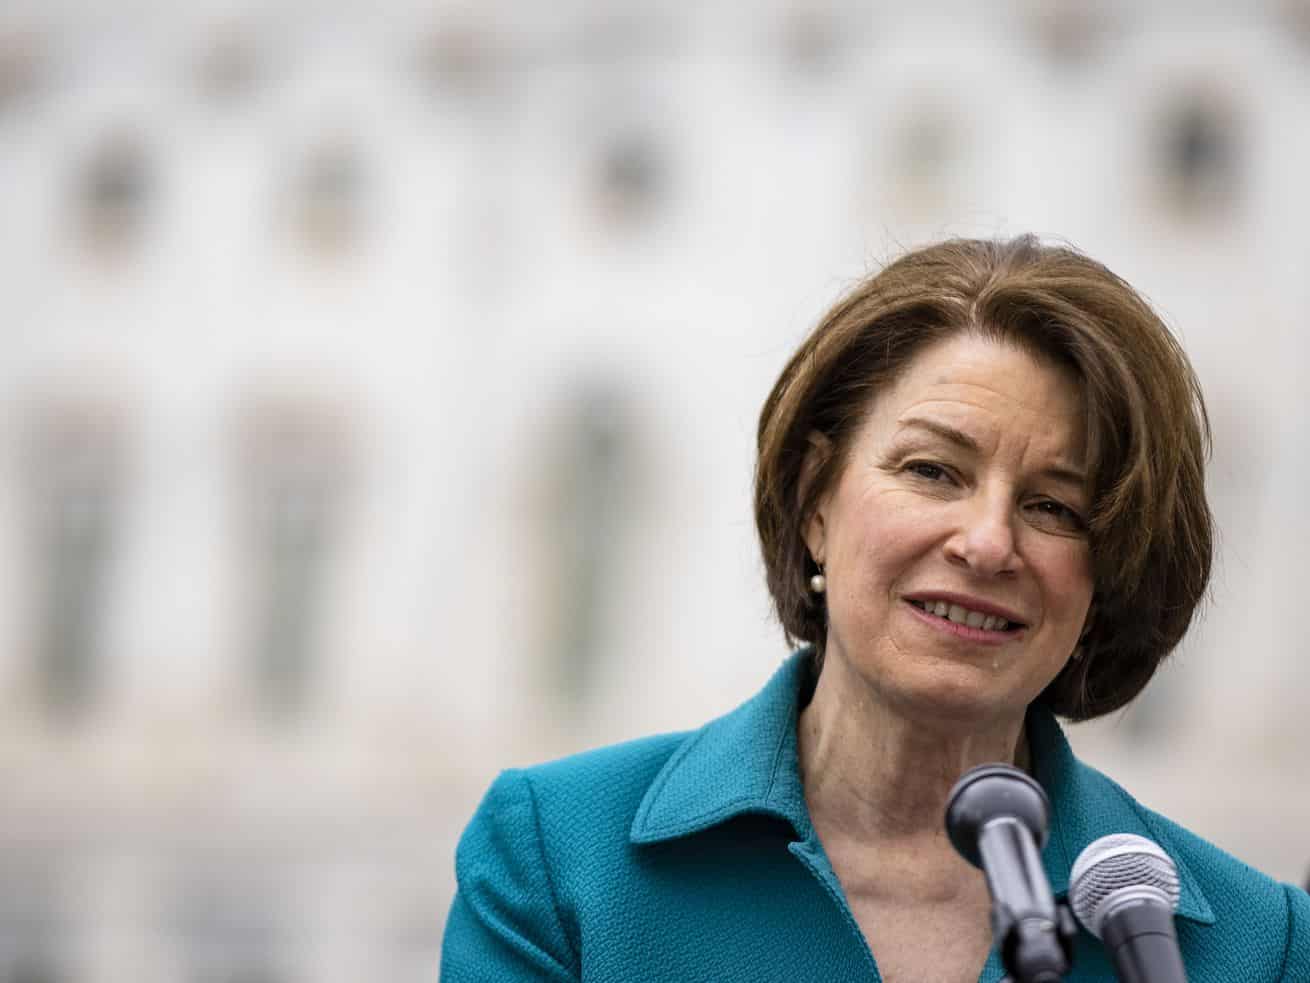 Amy Klobuchar takes aim at 12 vaccine misinformation influencers